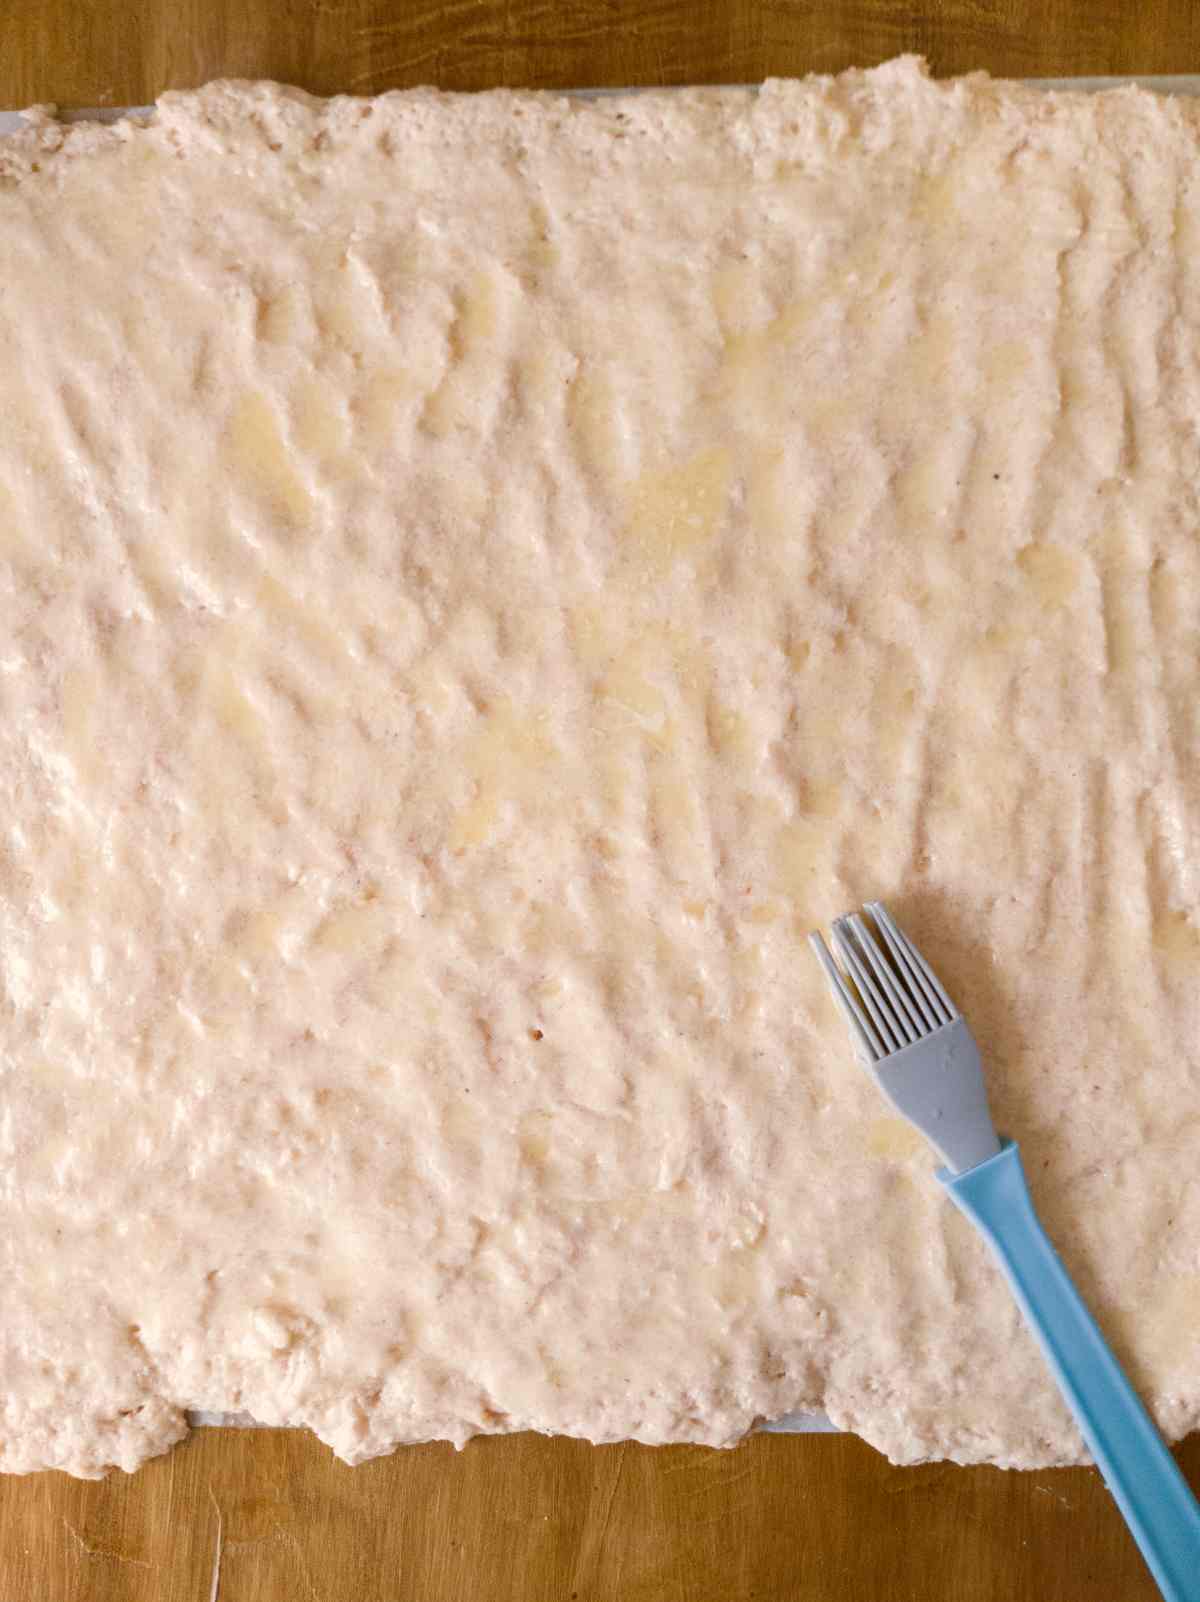 Spreading melted butter onto the rolled out dough with a silicone brush.